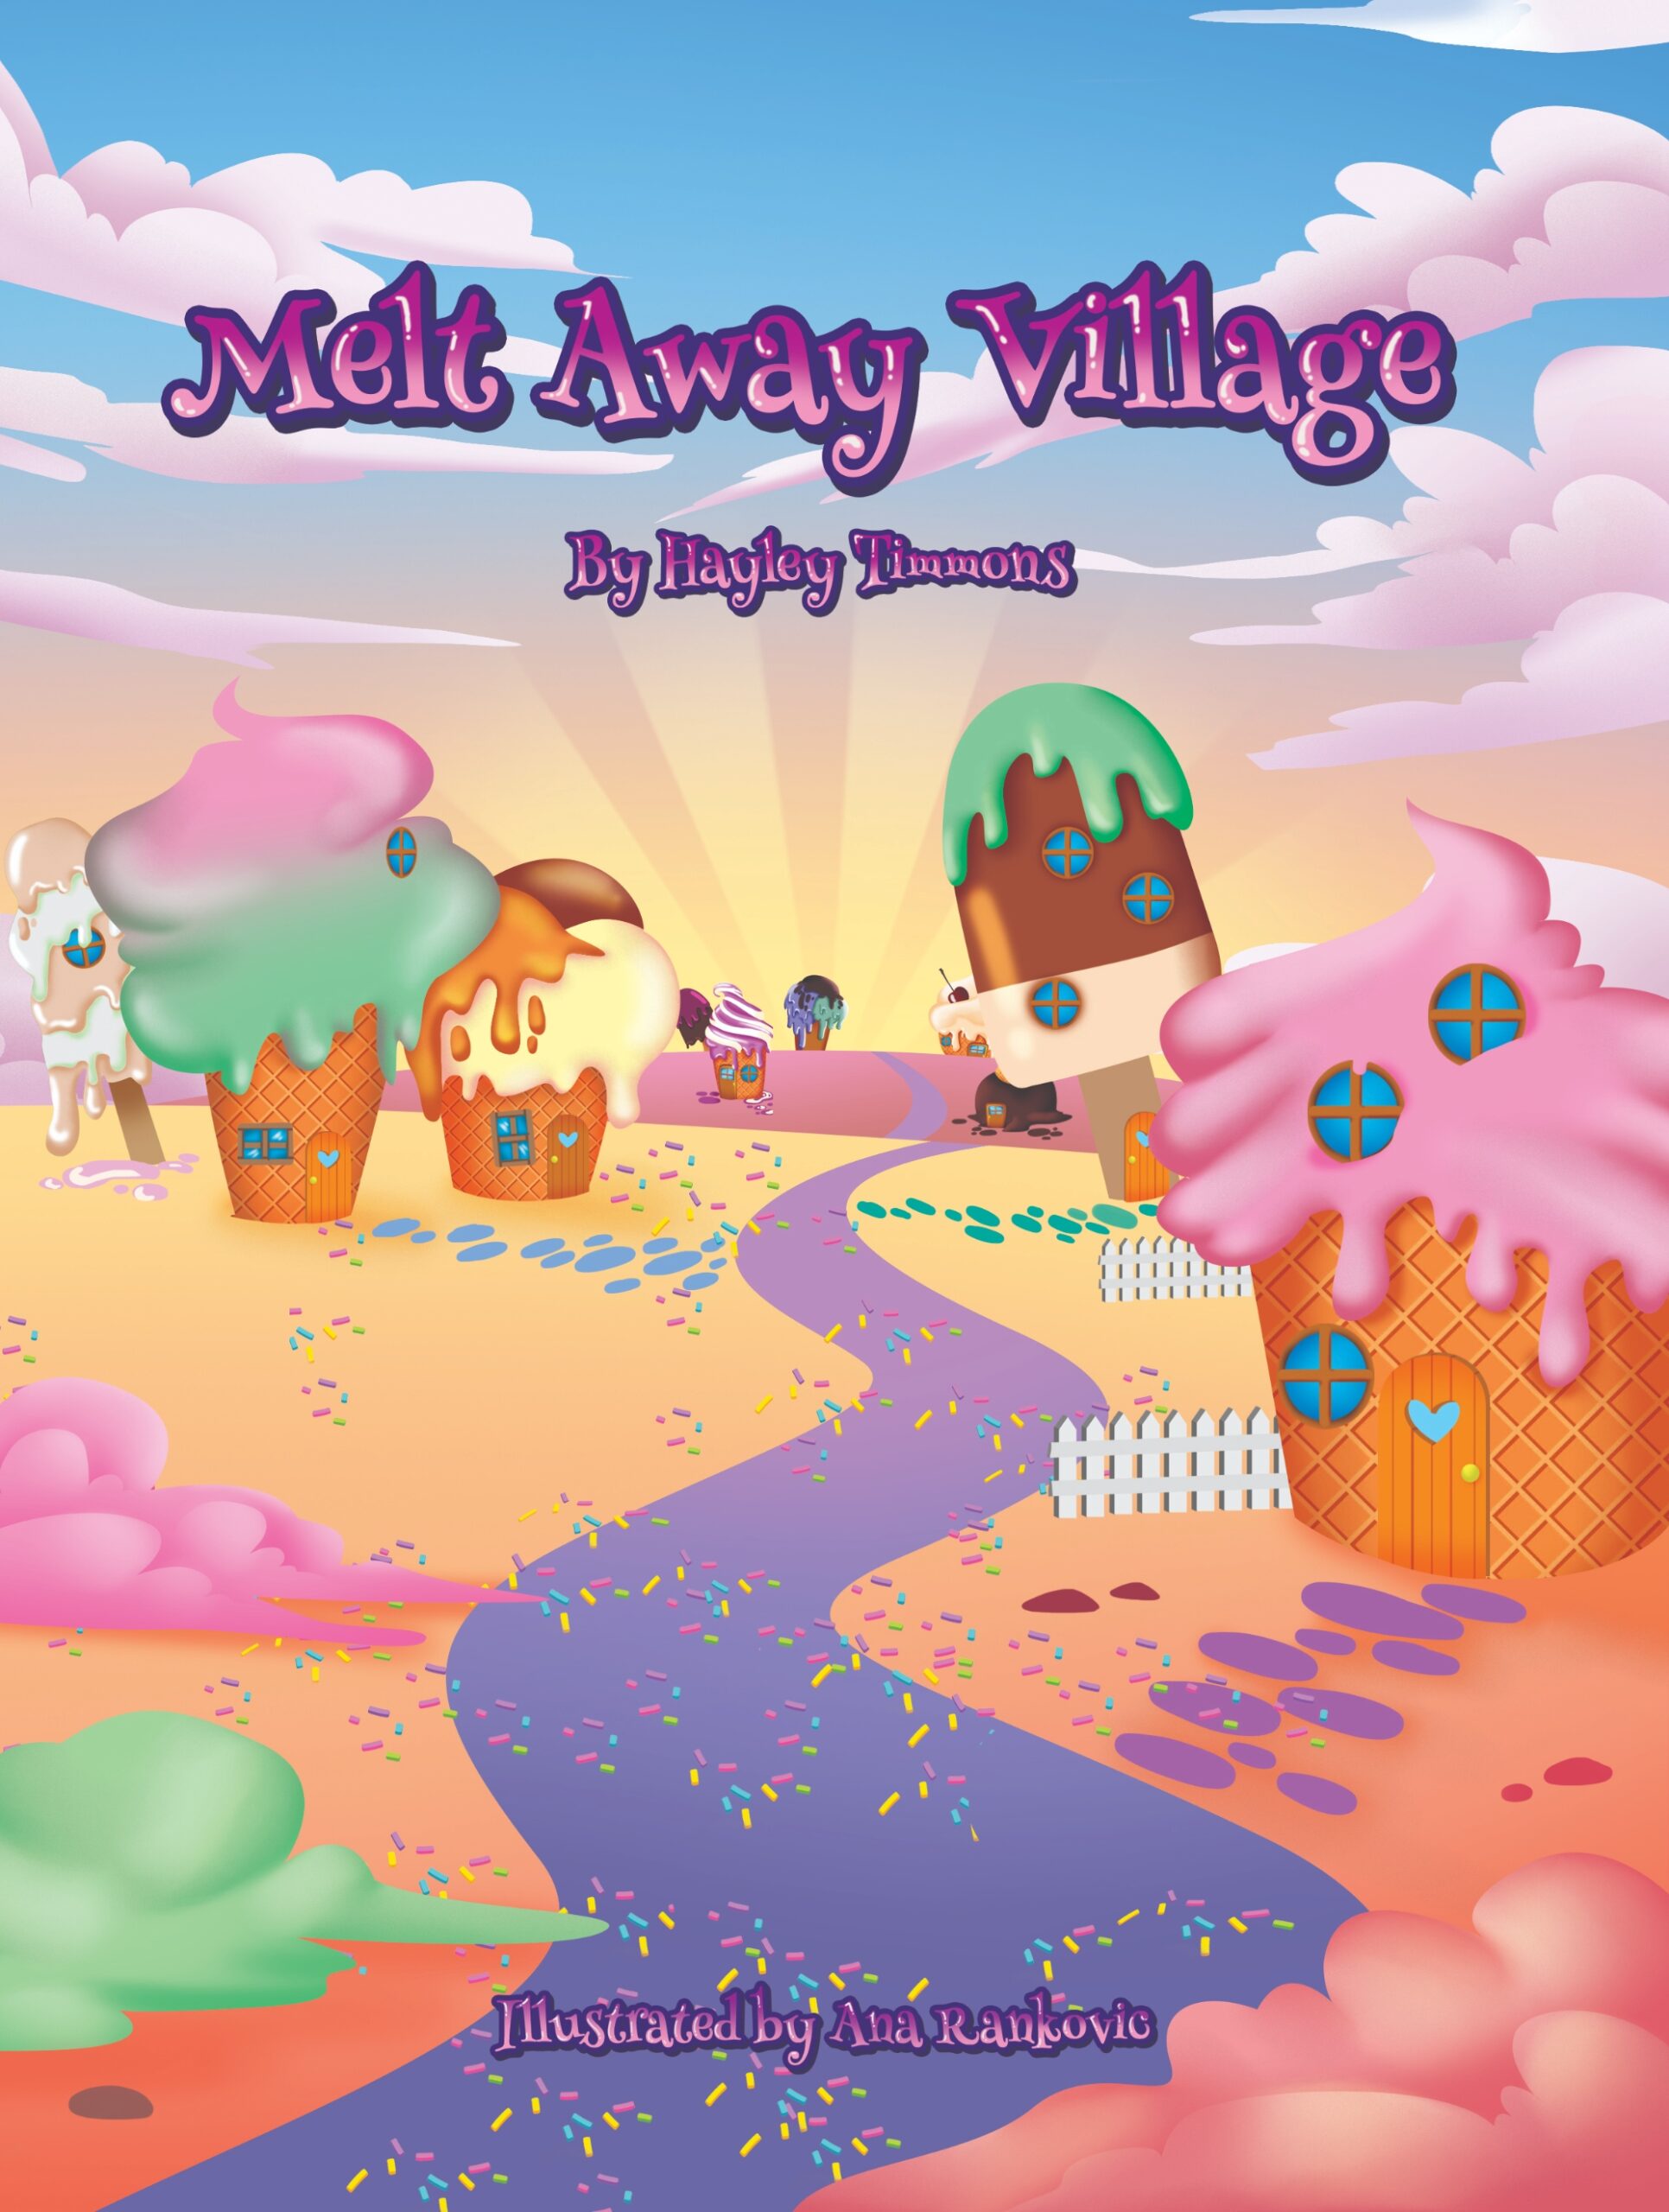 FREE: Melt Away Village by Hayley Timmons